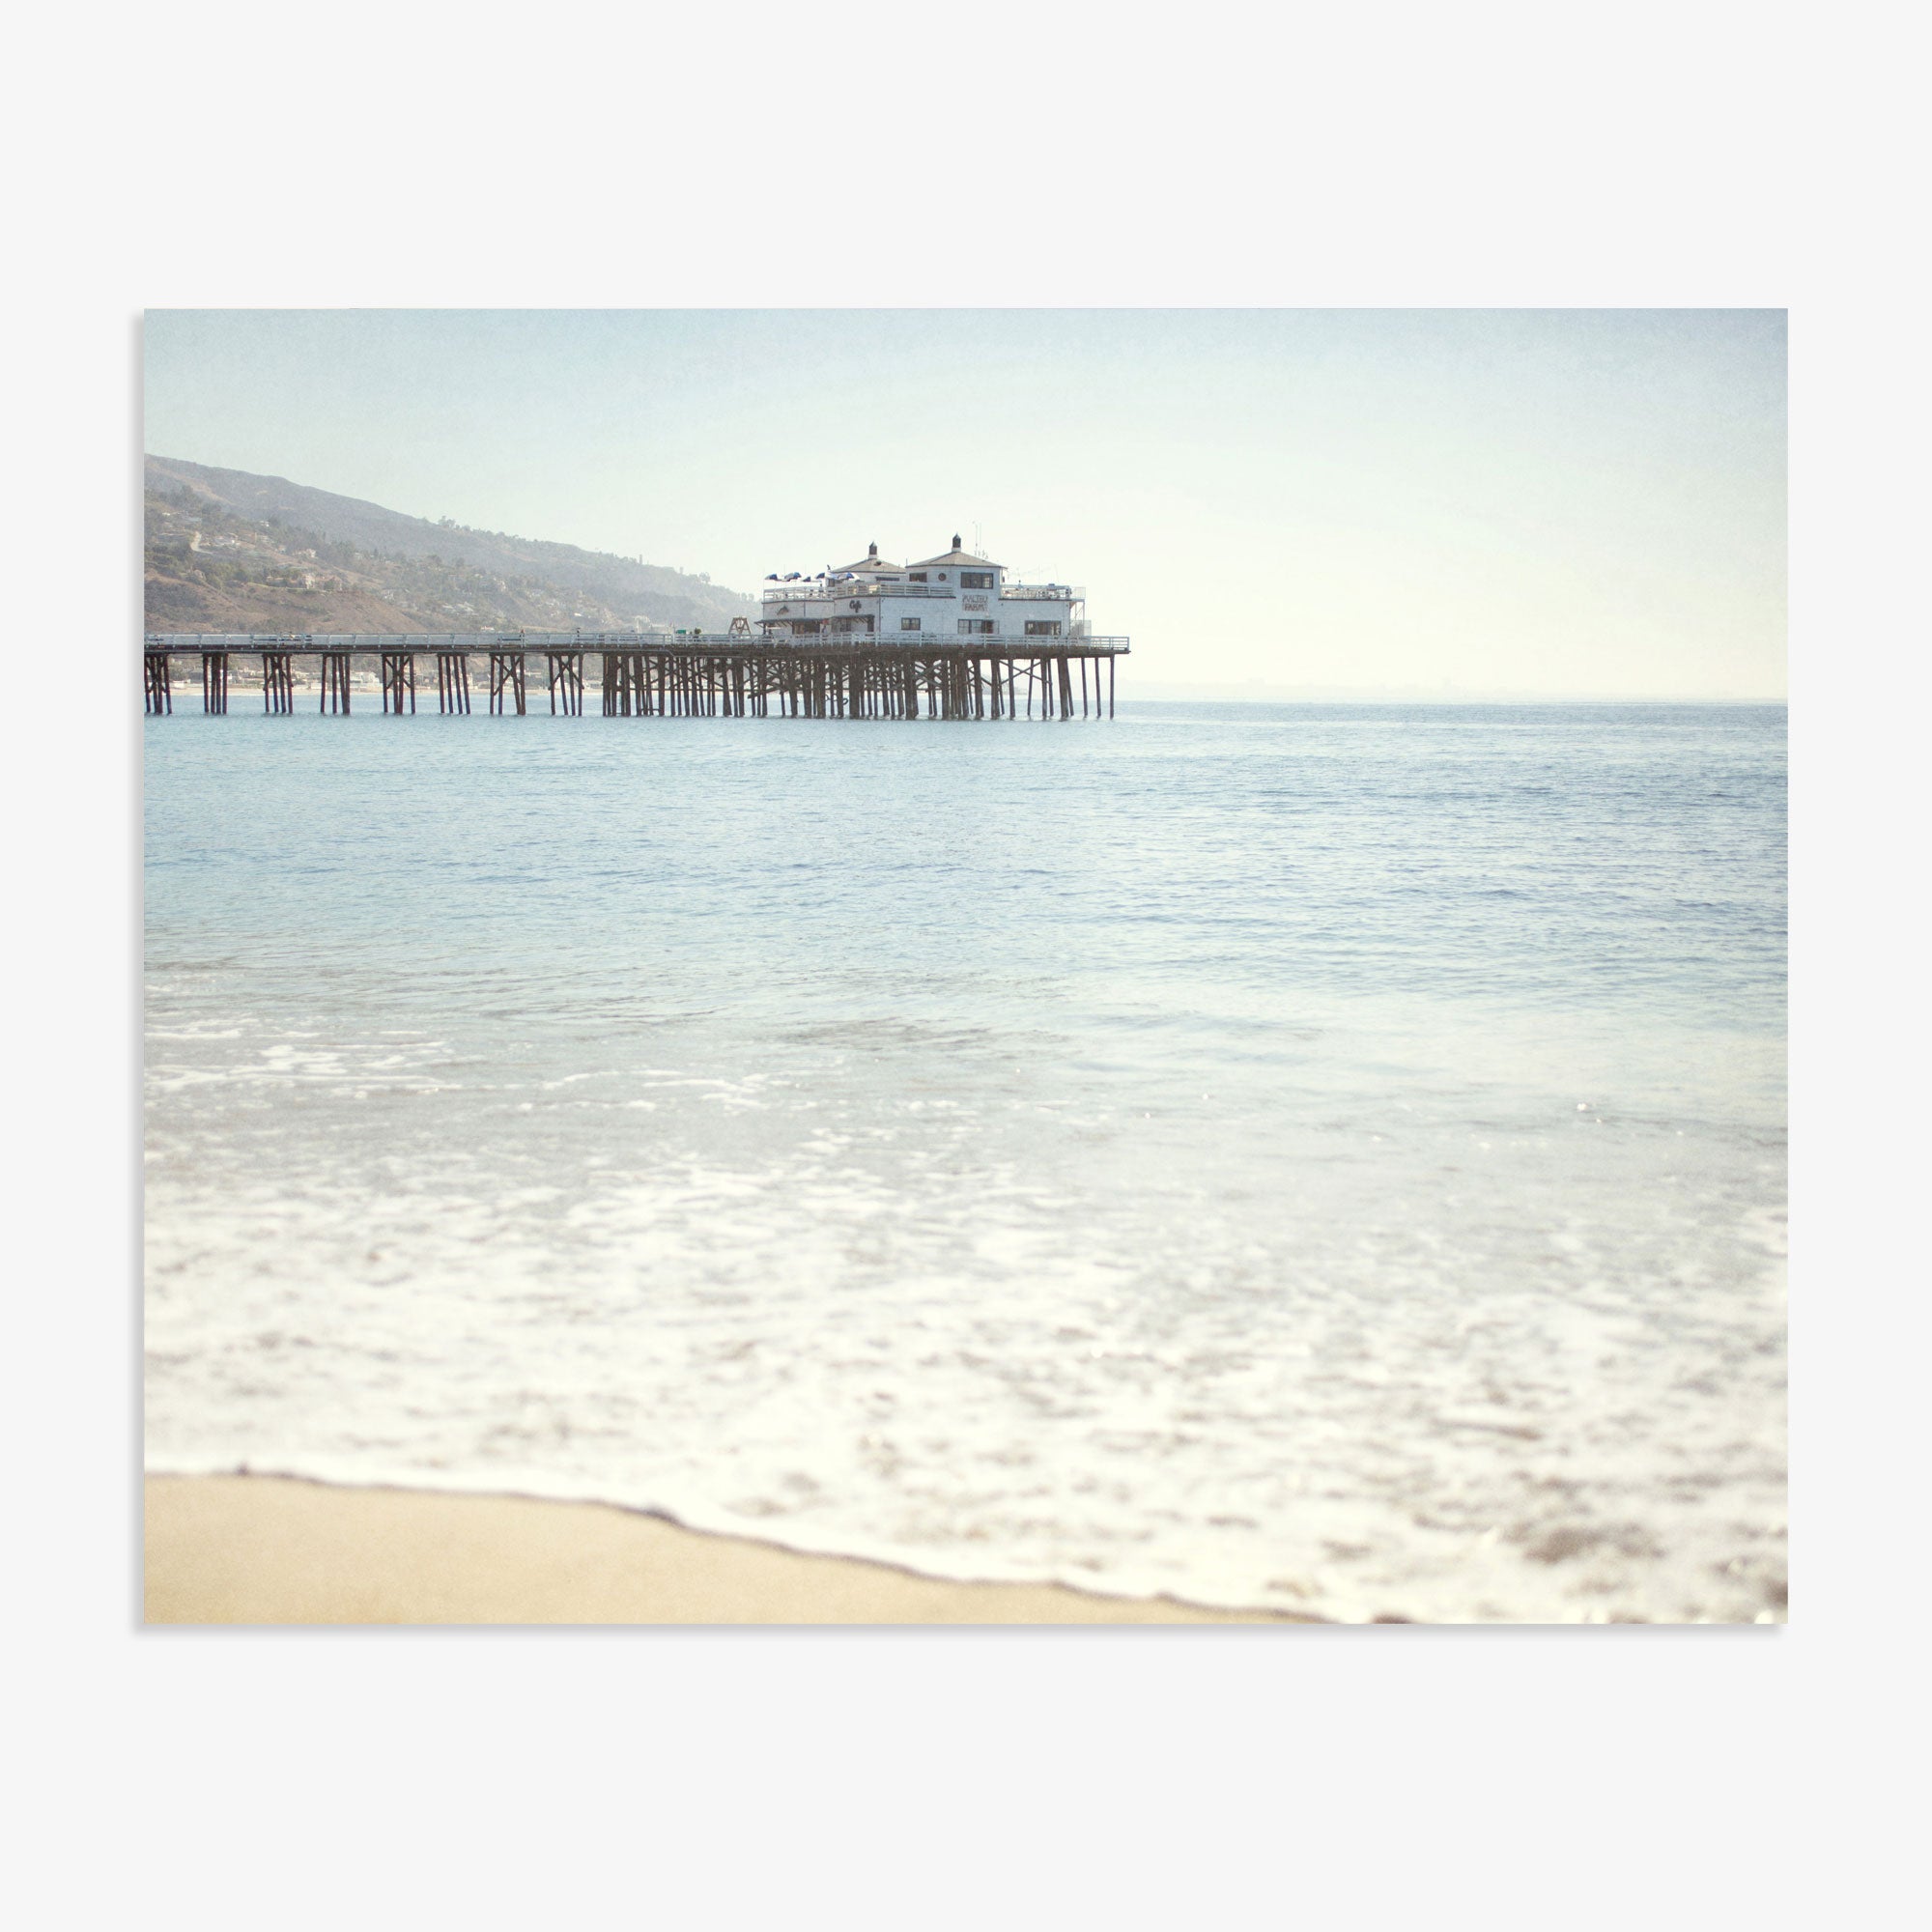 A tranquil coastal scene featuring Offley Green&#39;s &#39;Malibu Pier&#39; California Beach Print extending into the ocean, with a large building at its end under a clear blue sky. Gentle waves touch a sandy beach in the foreground.